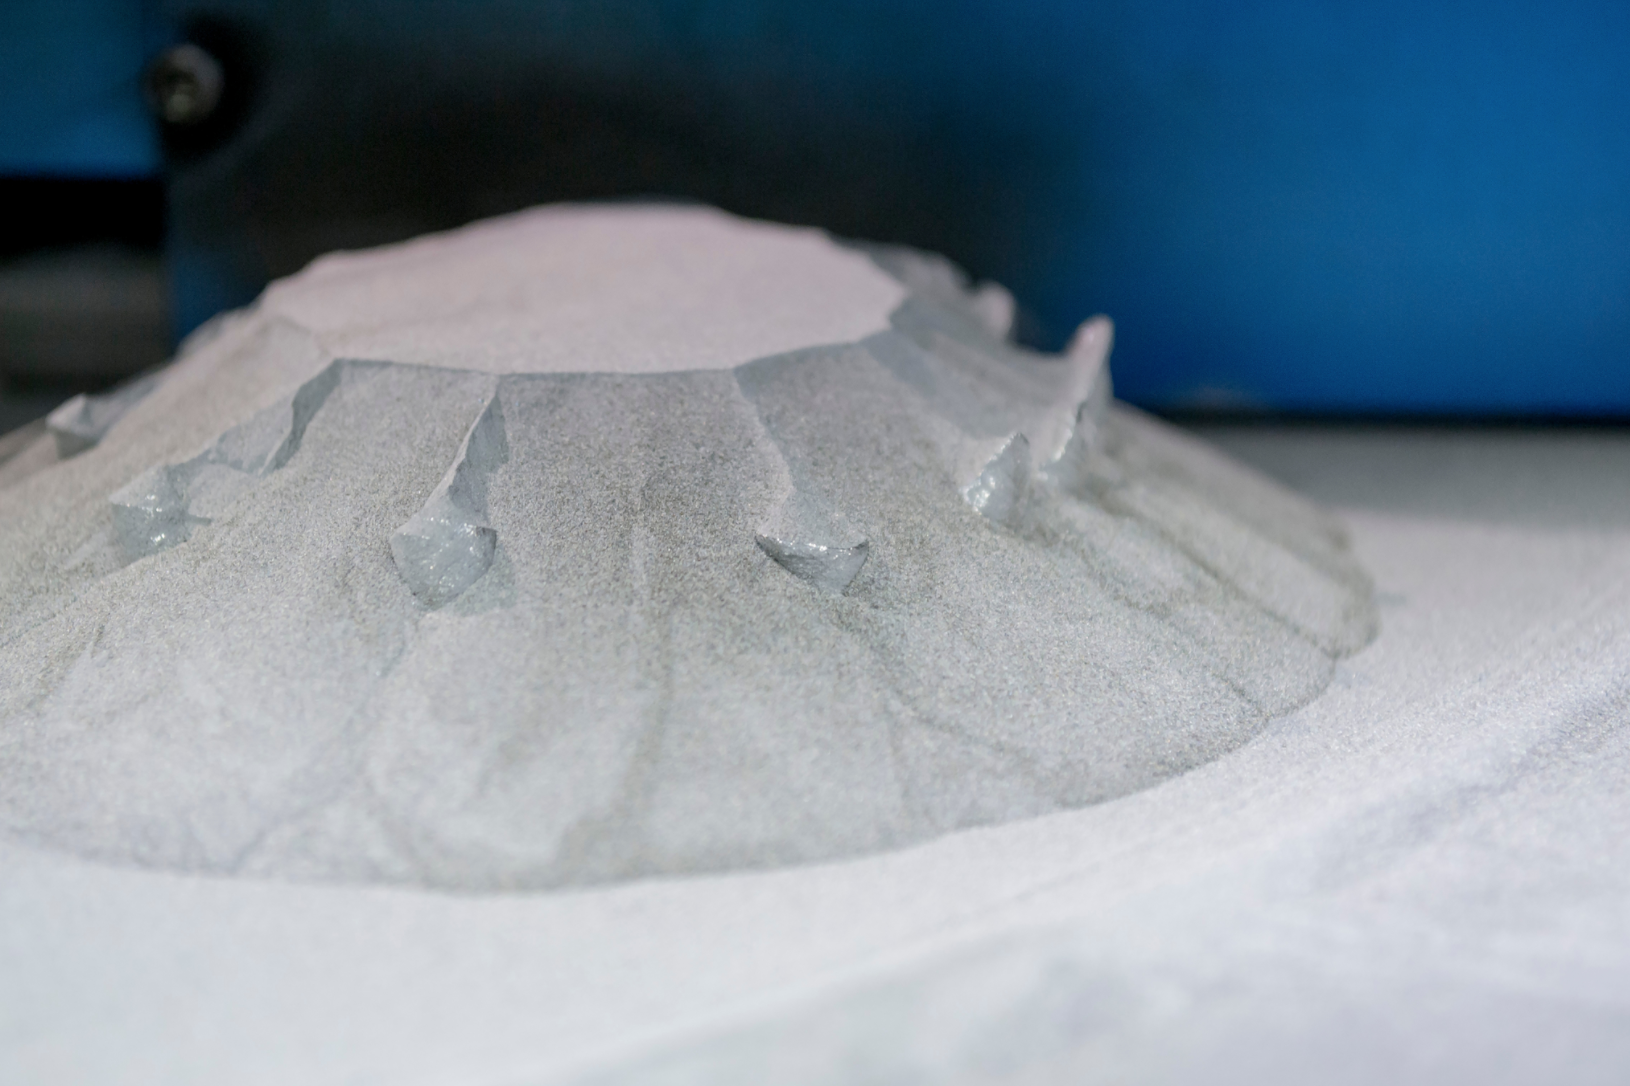 Metal powder like that shown here is but one of many materials used to build 3D-printed parts.